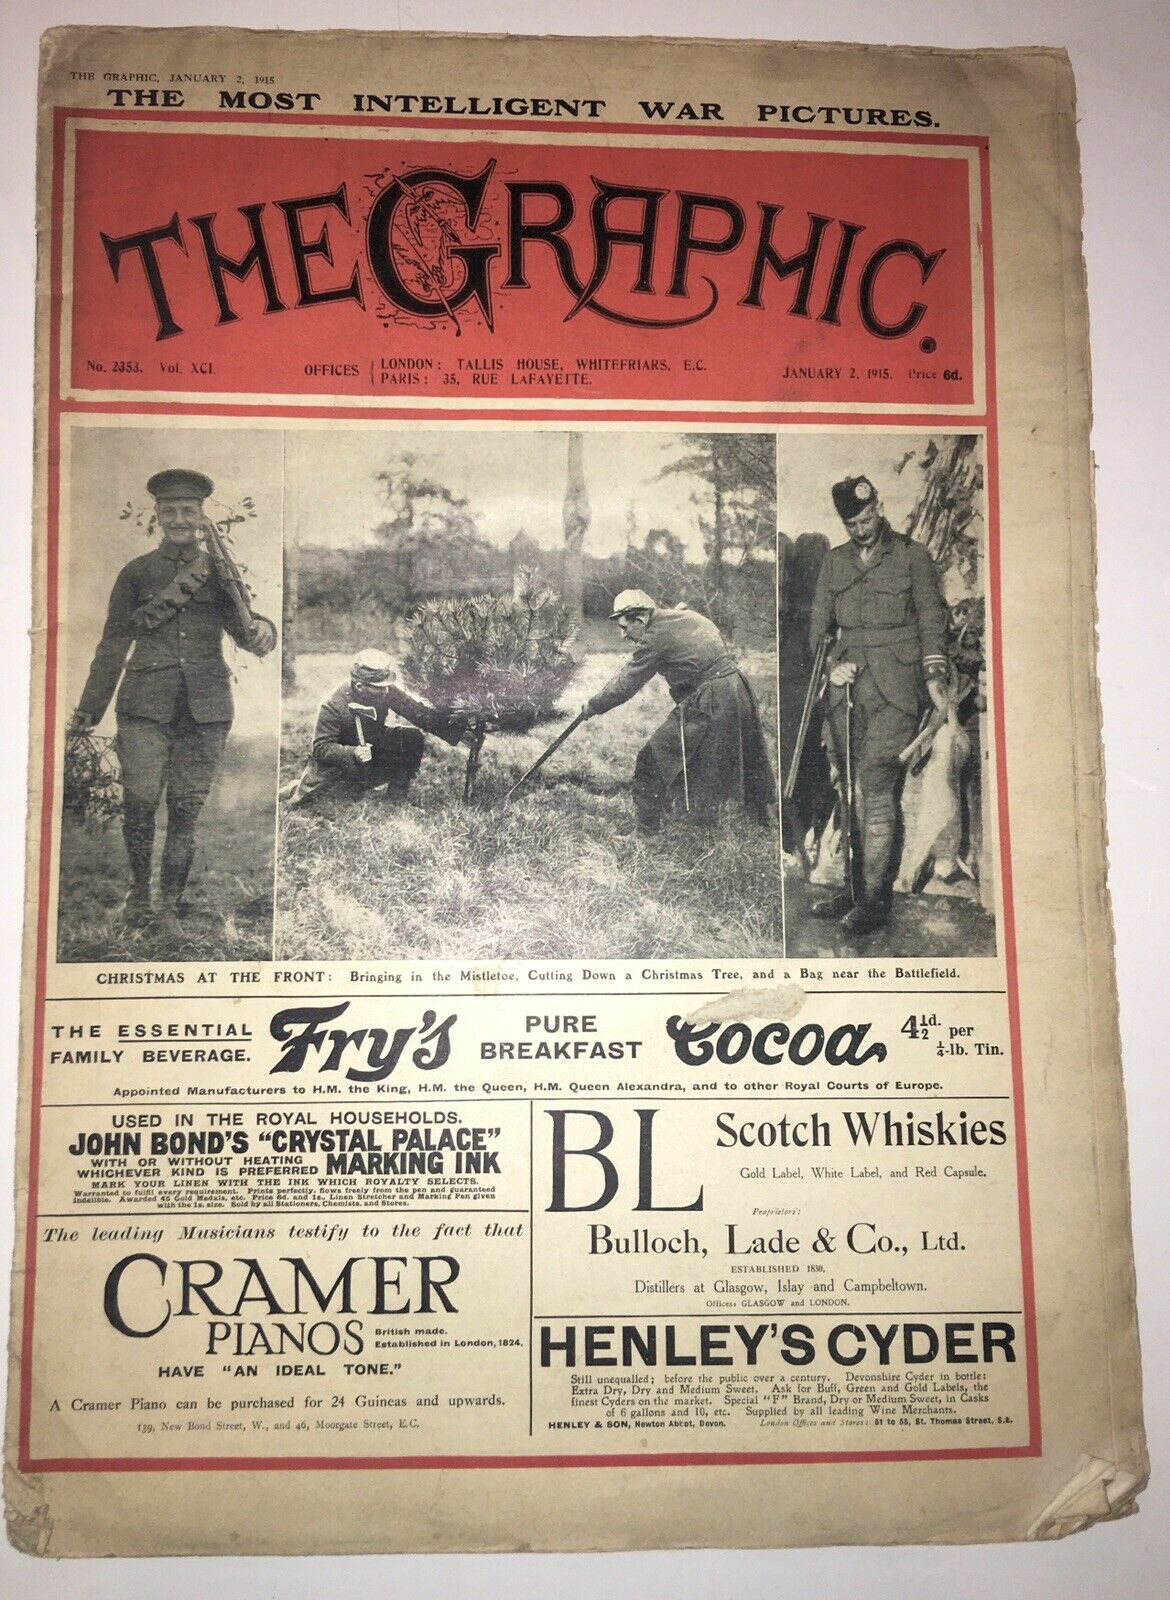 January 2 1915 The Graphic Ww1 War Pictures Magazine / Zeppelin / Airplane / Ads